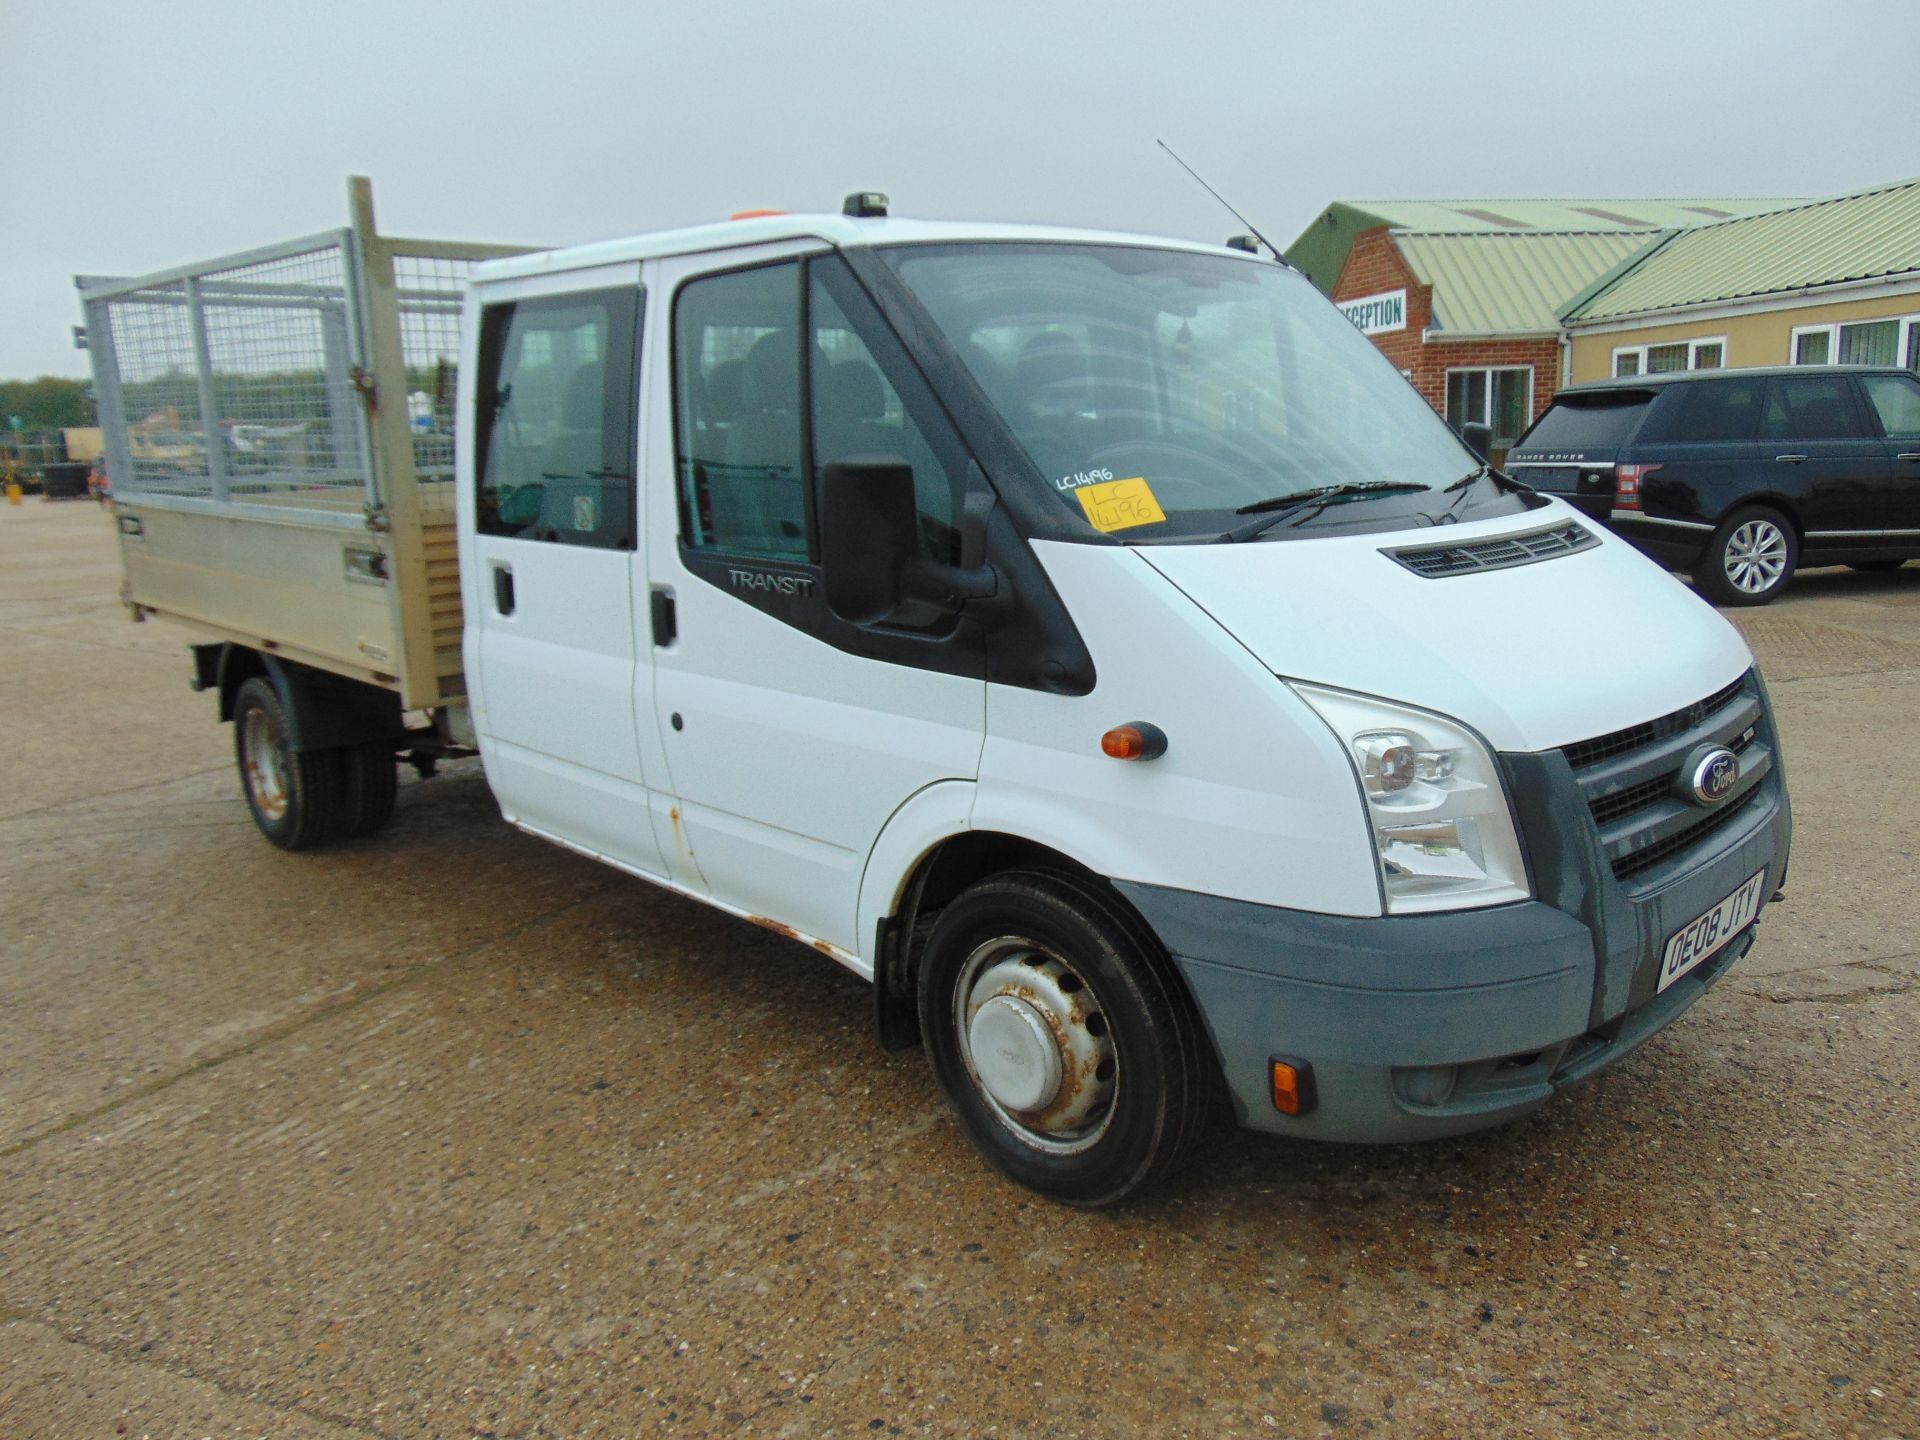 Ford Transit 115 T350 Crew Cab Flat Bed Tipper - Image 2 of 16